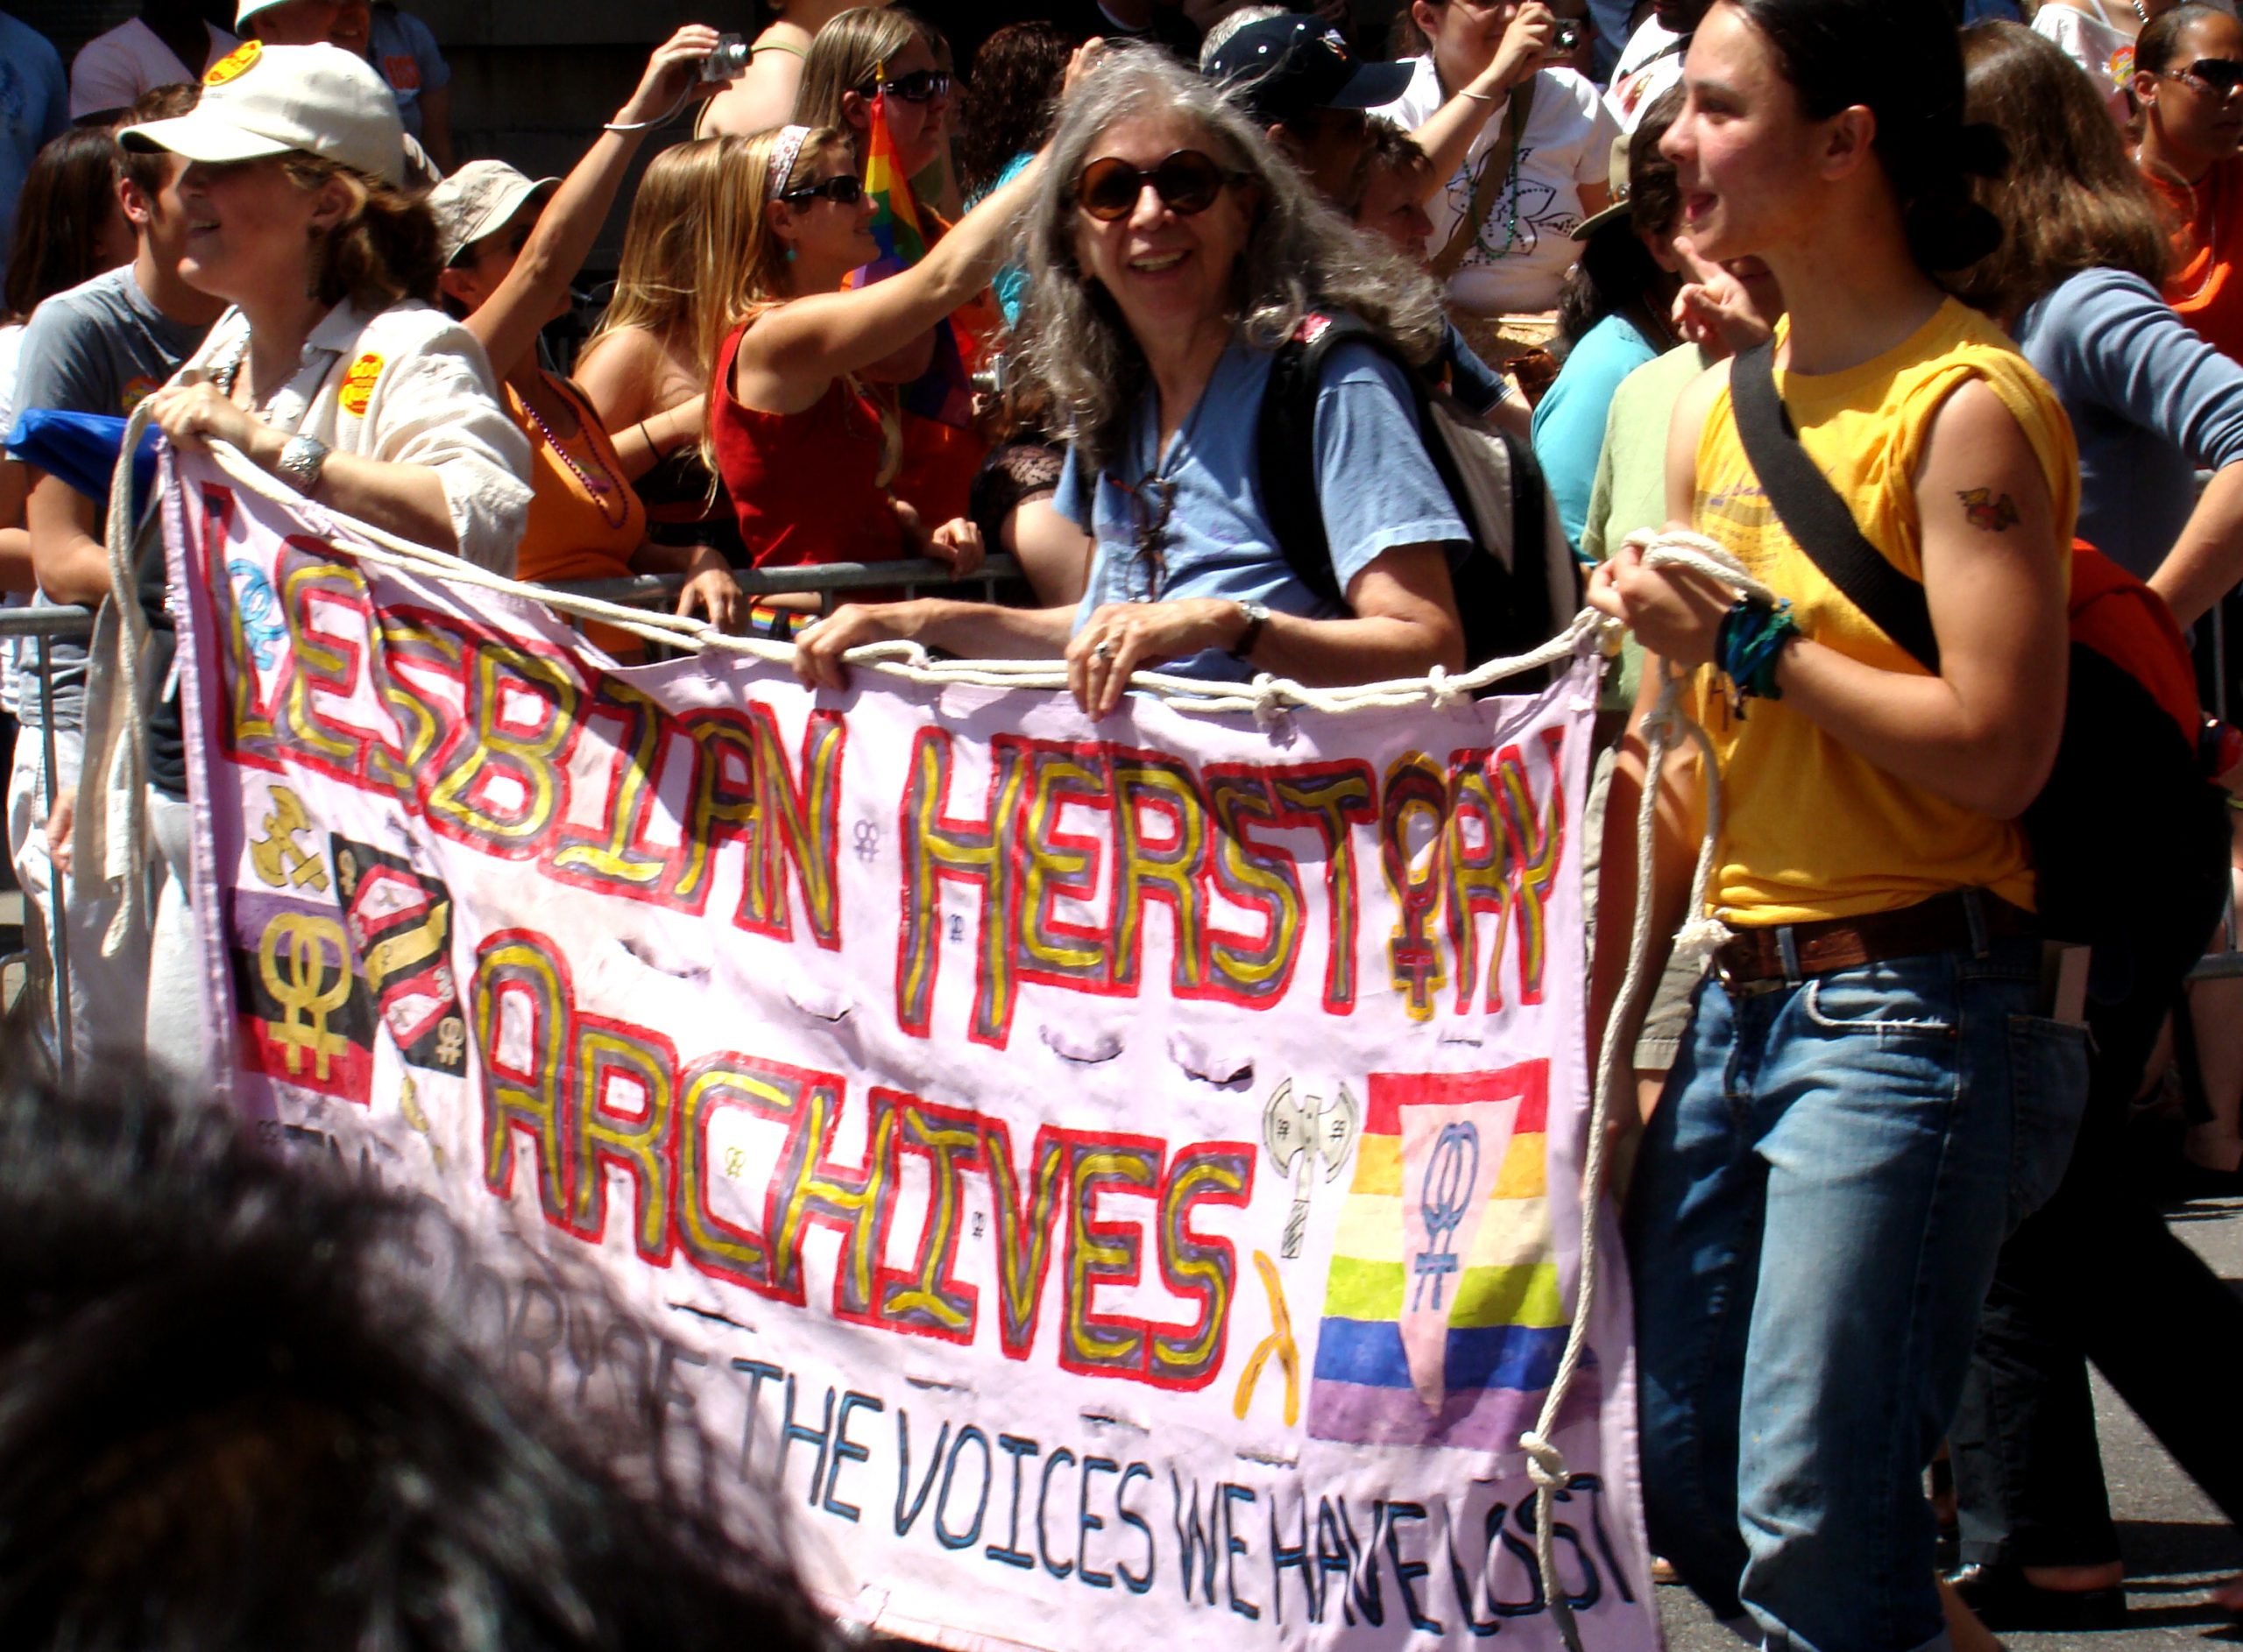 A crowd holds up a banner that says "Lesbian Herstory Archives."